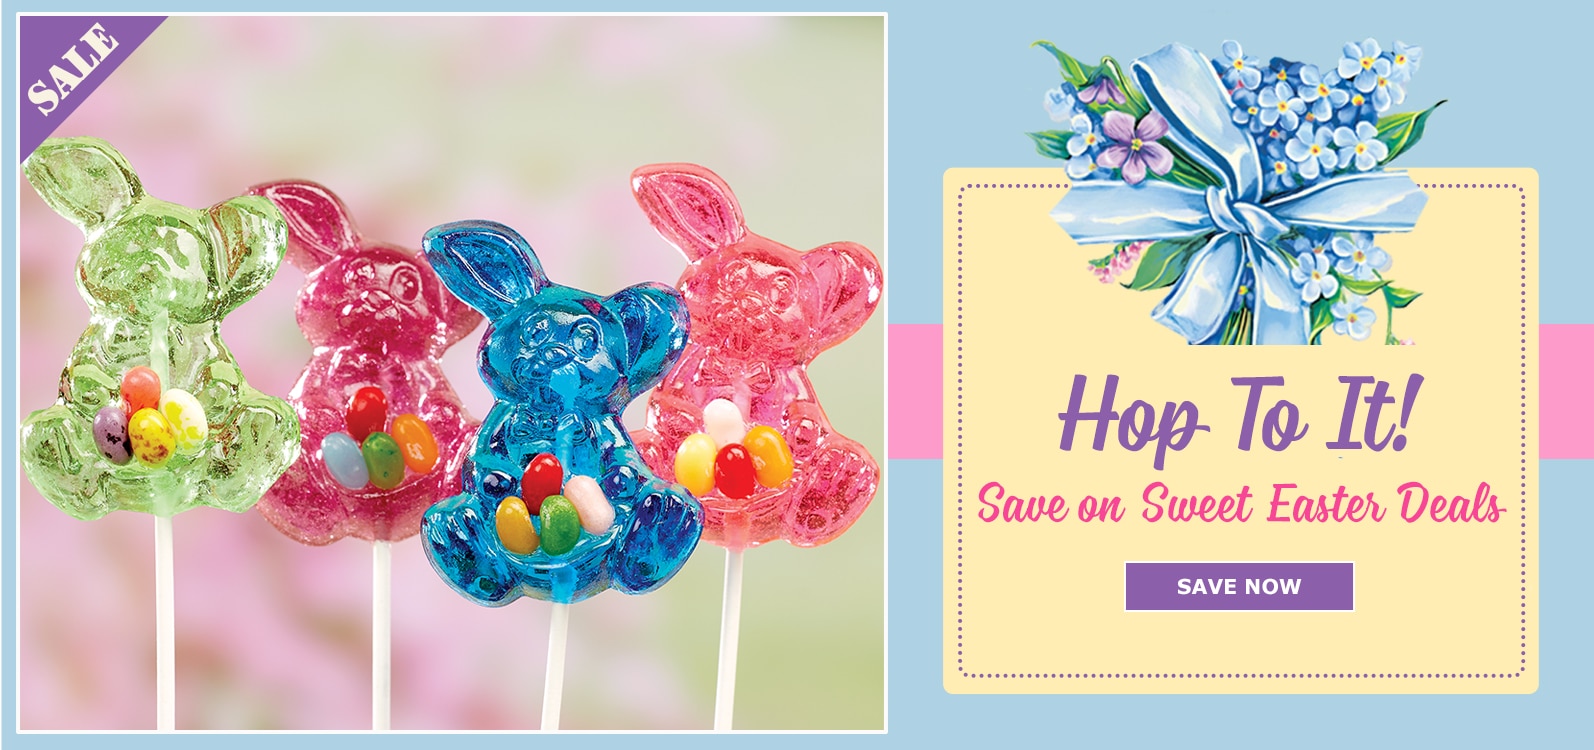 Hop To It! Save on Sweet Easter Deals. Save Now